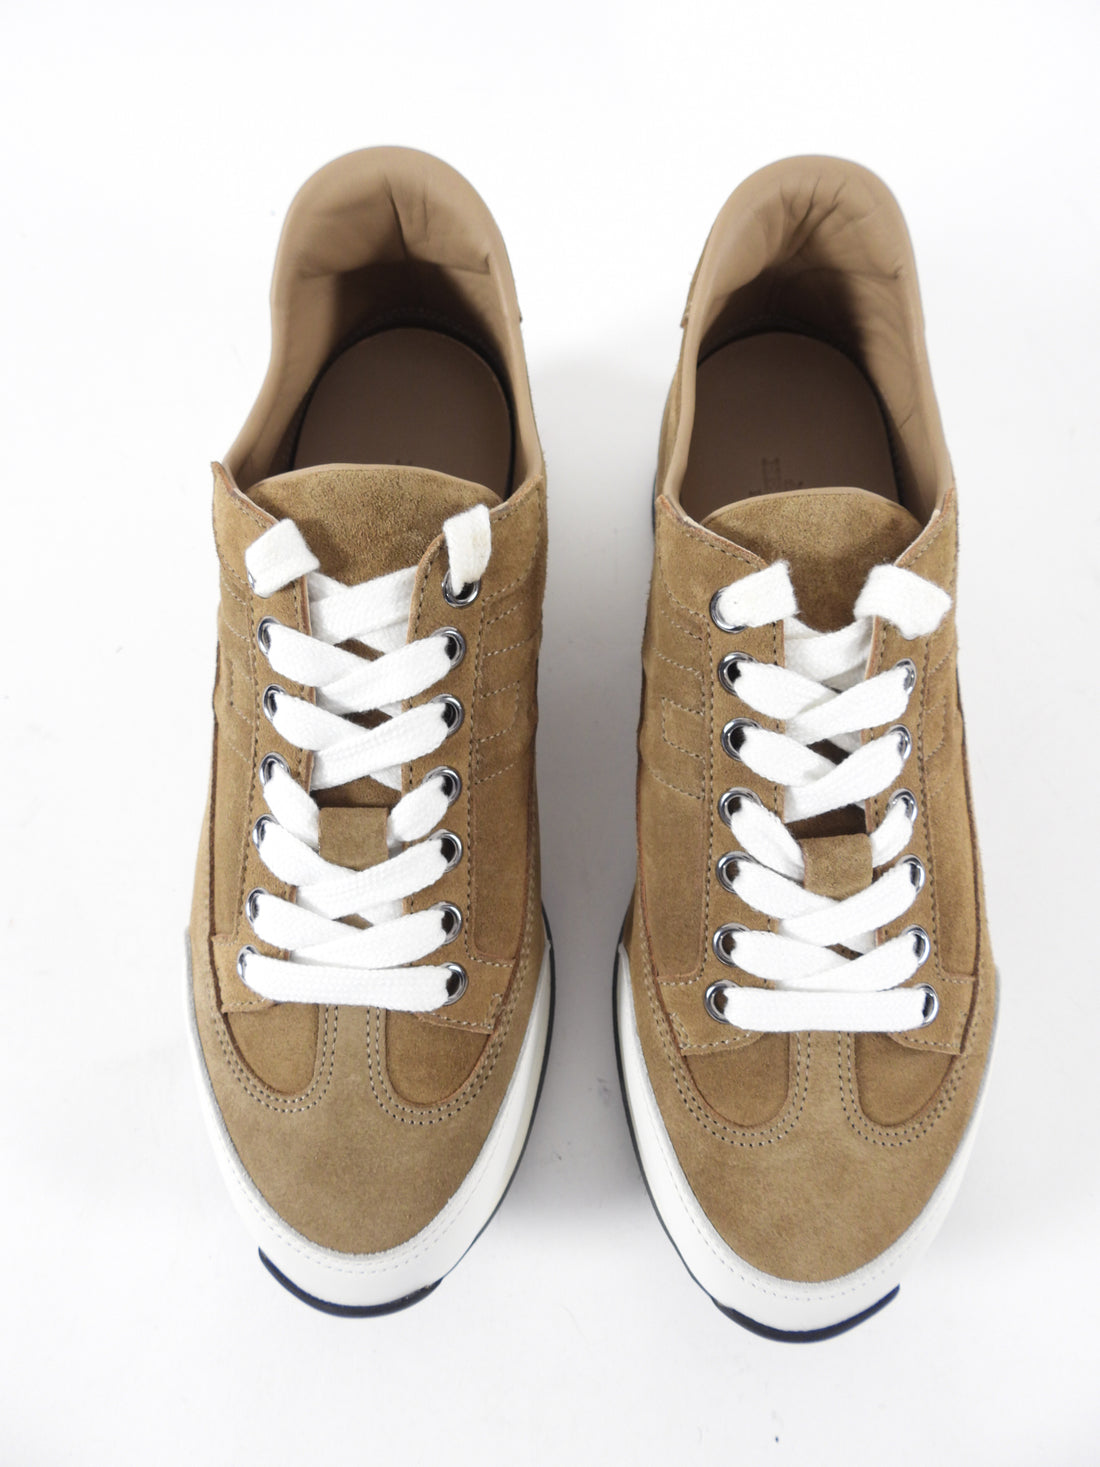 Hermes Goal Suede Light Brown Sneakers - 37 / USA 6.5 – I MISS YOU VINTAGE